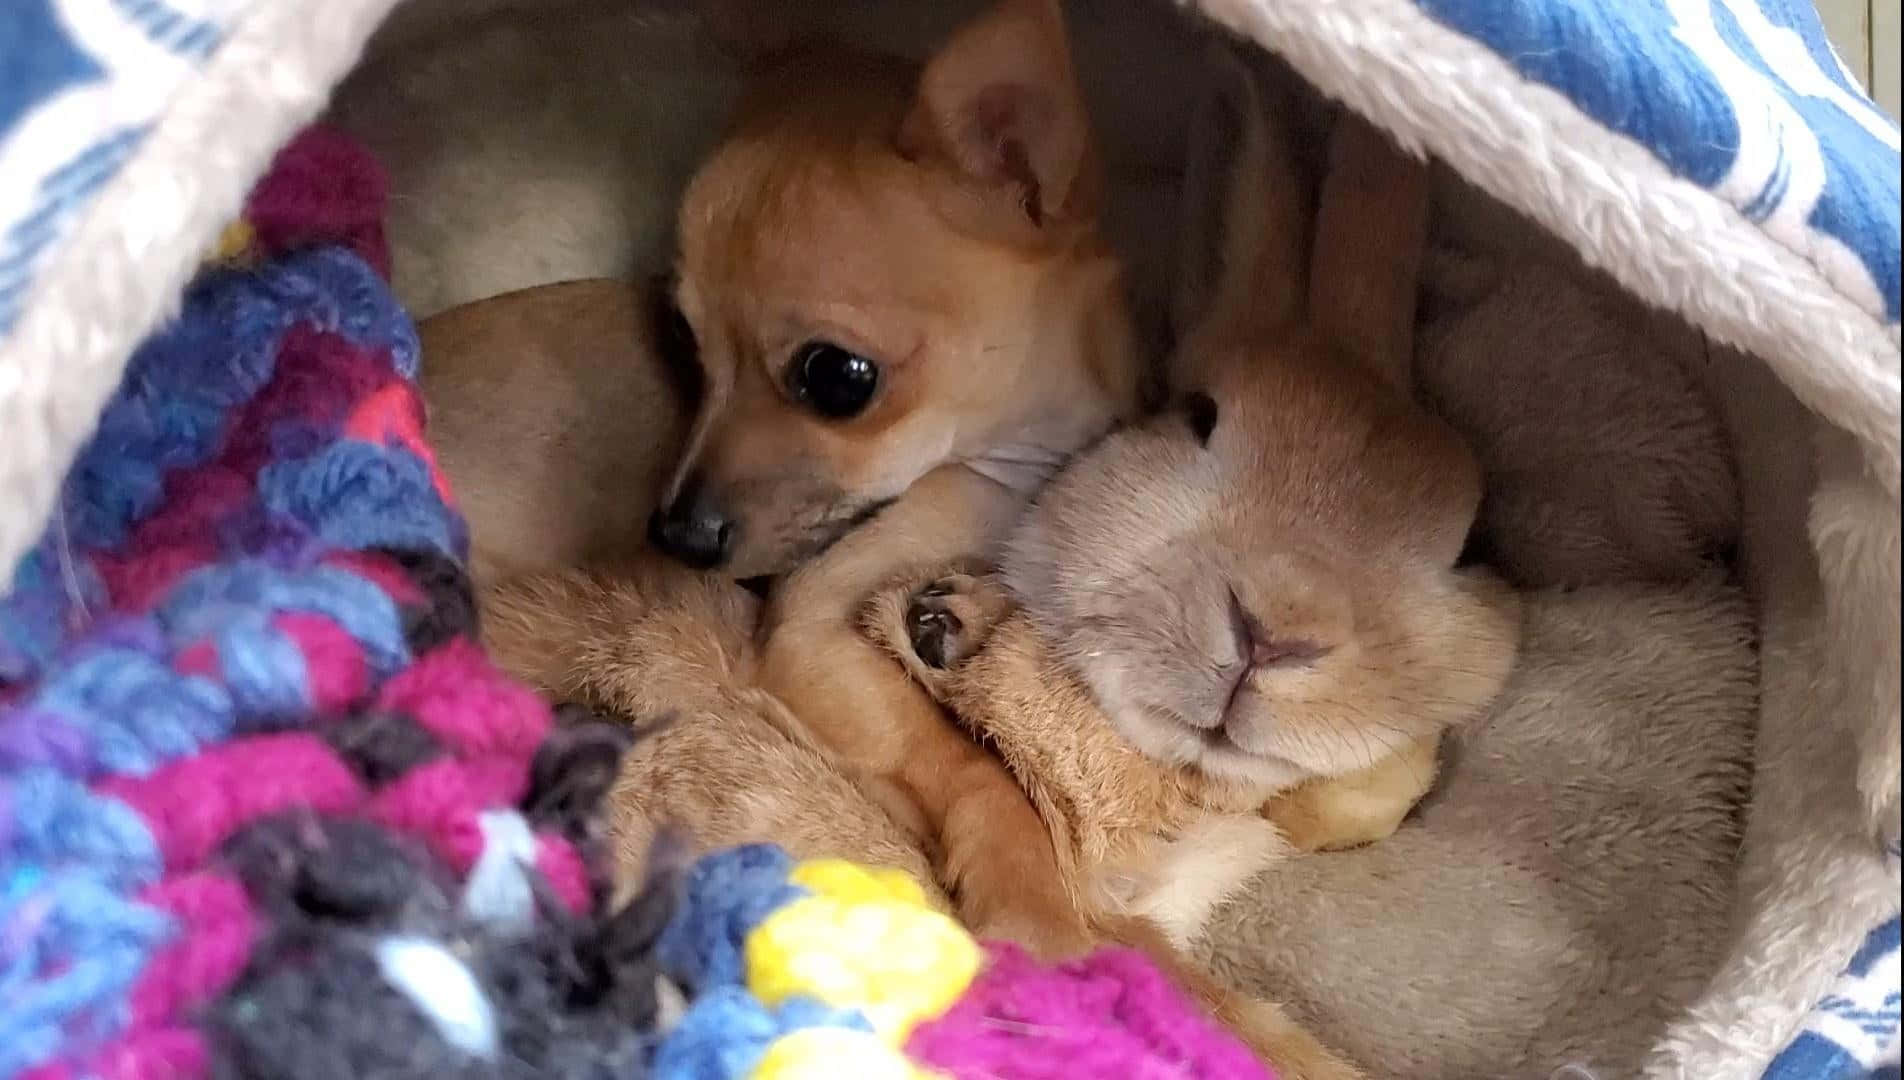 Make your day brighter with this cuddly Teacup Chihuahua!